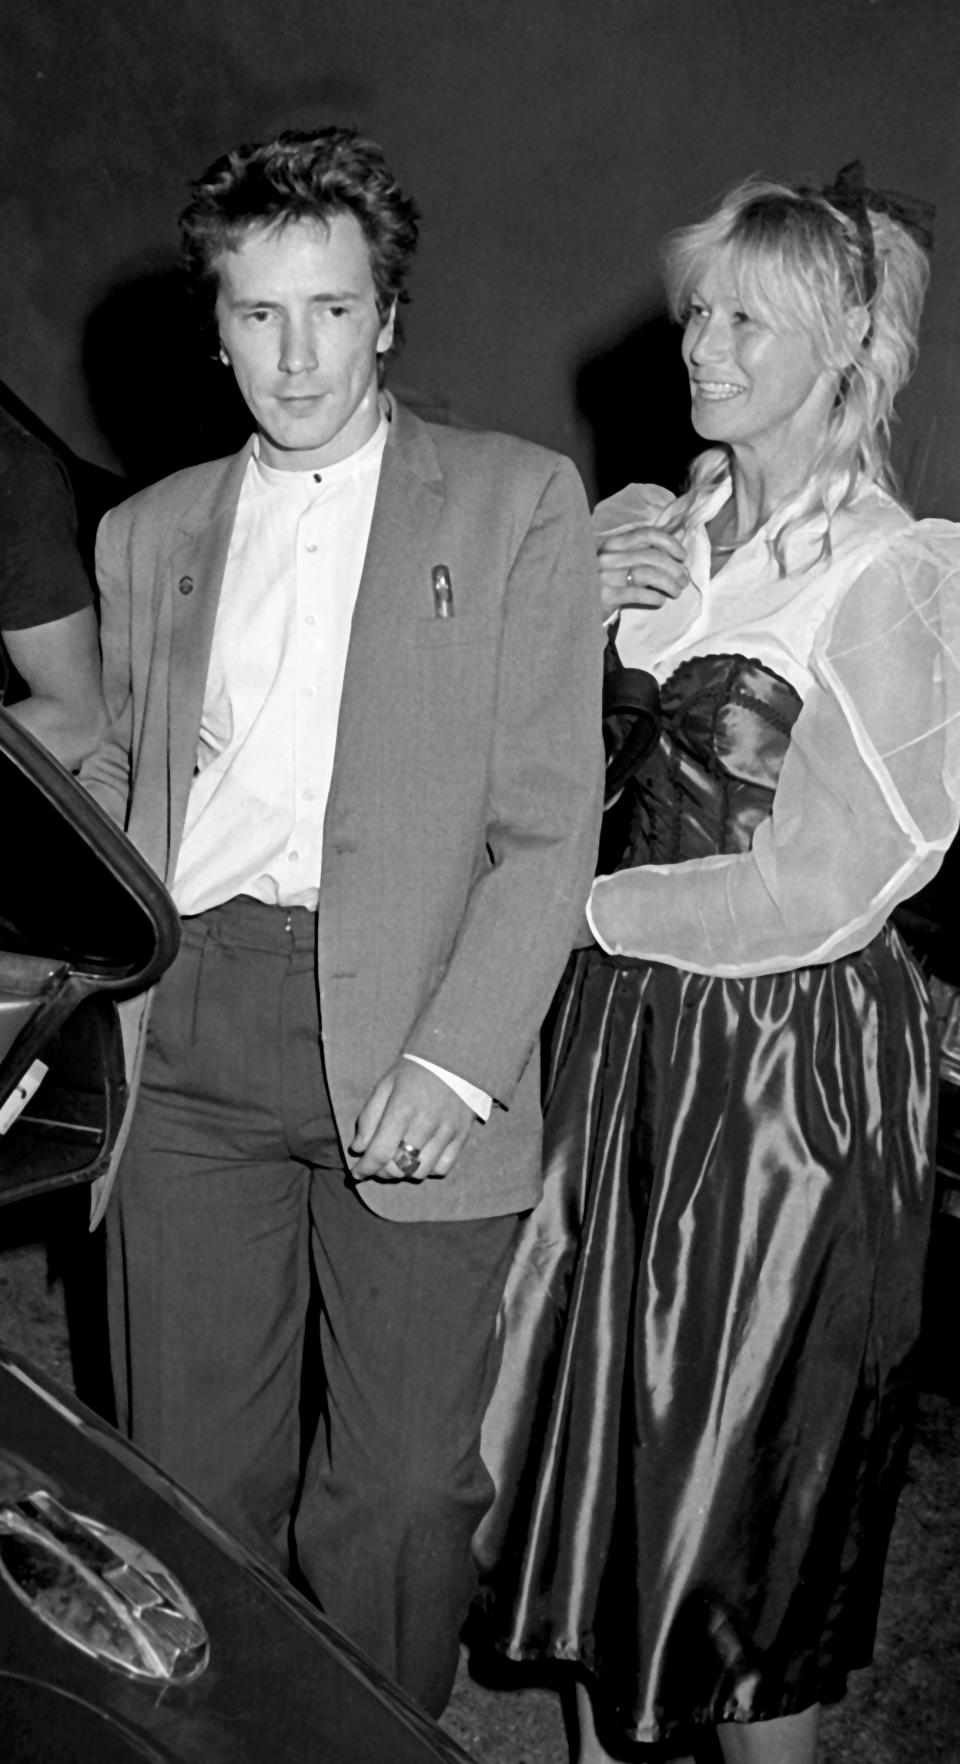  John Lydon and Nora Forster in 1984. (Ron Galella/Ron Galella Collection via Getty Images)